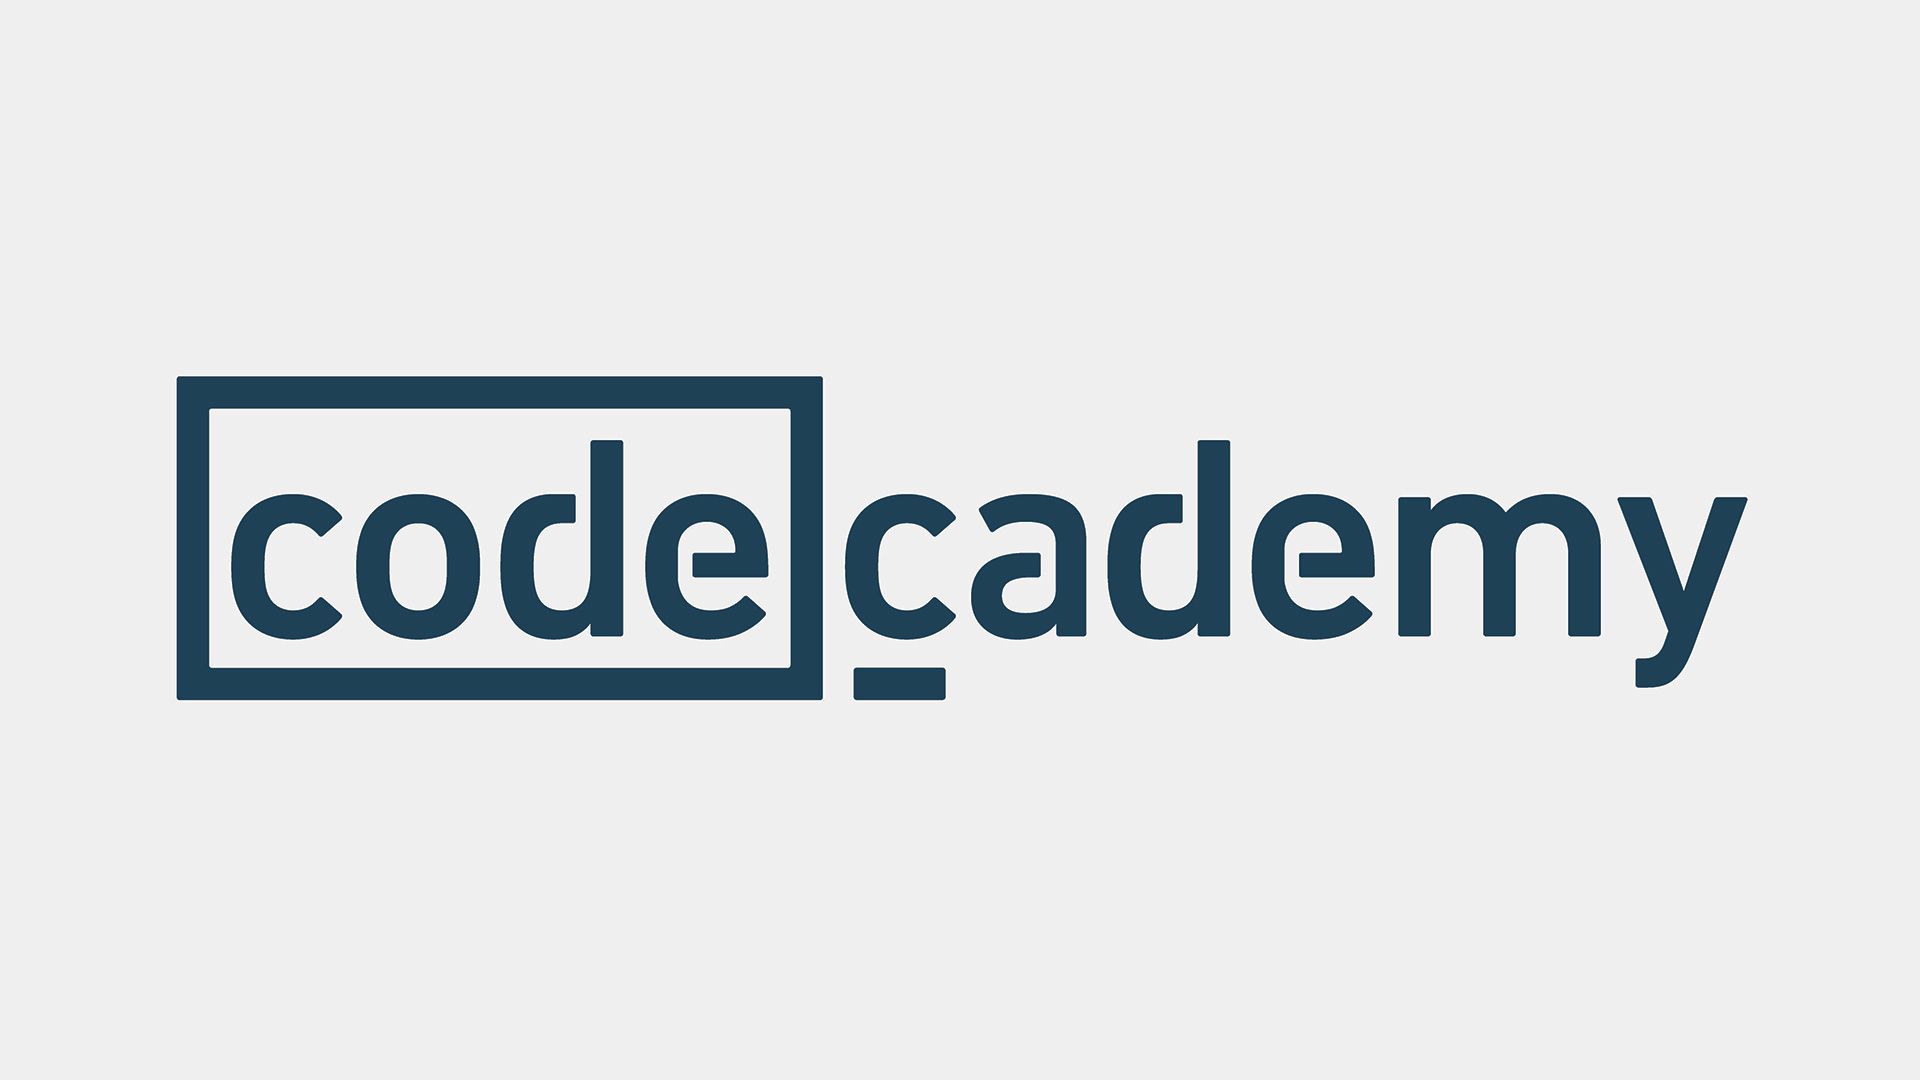 66: Codeacademy Receives $30 Million Investment Lead By Naspers Ventures